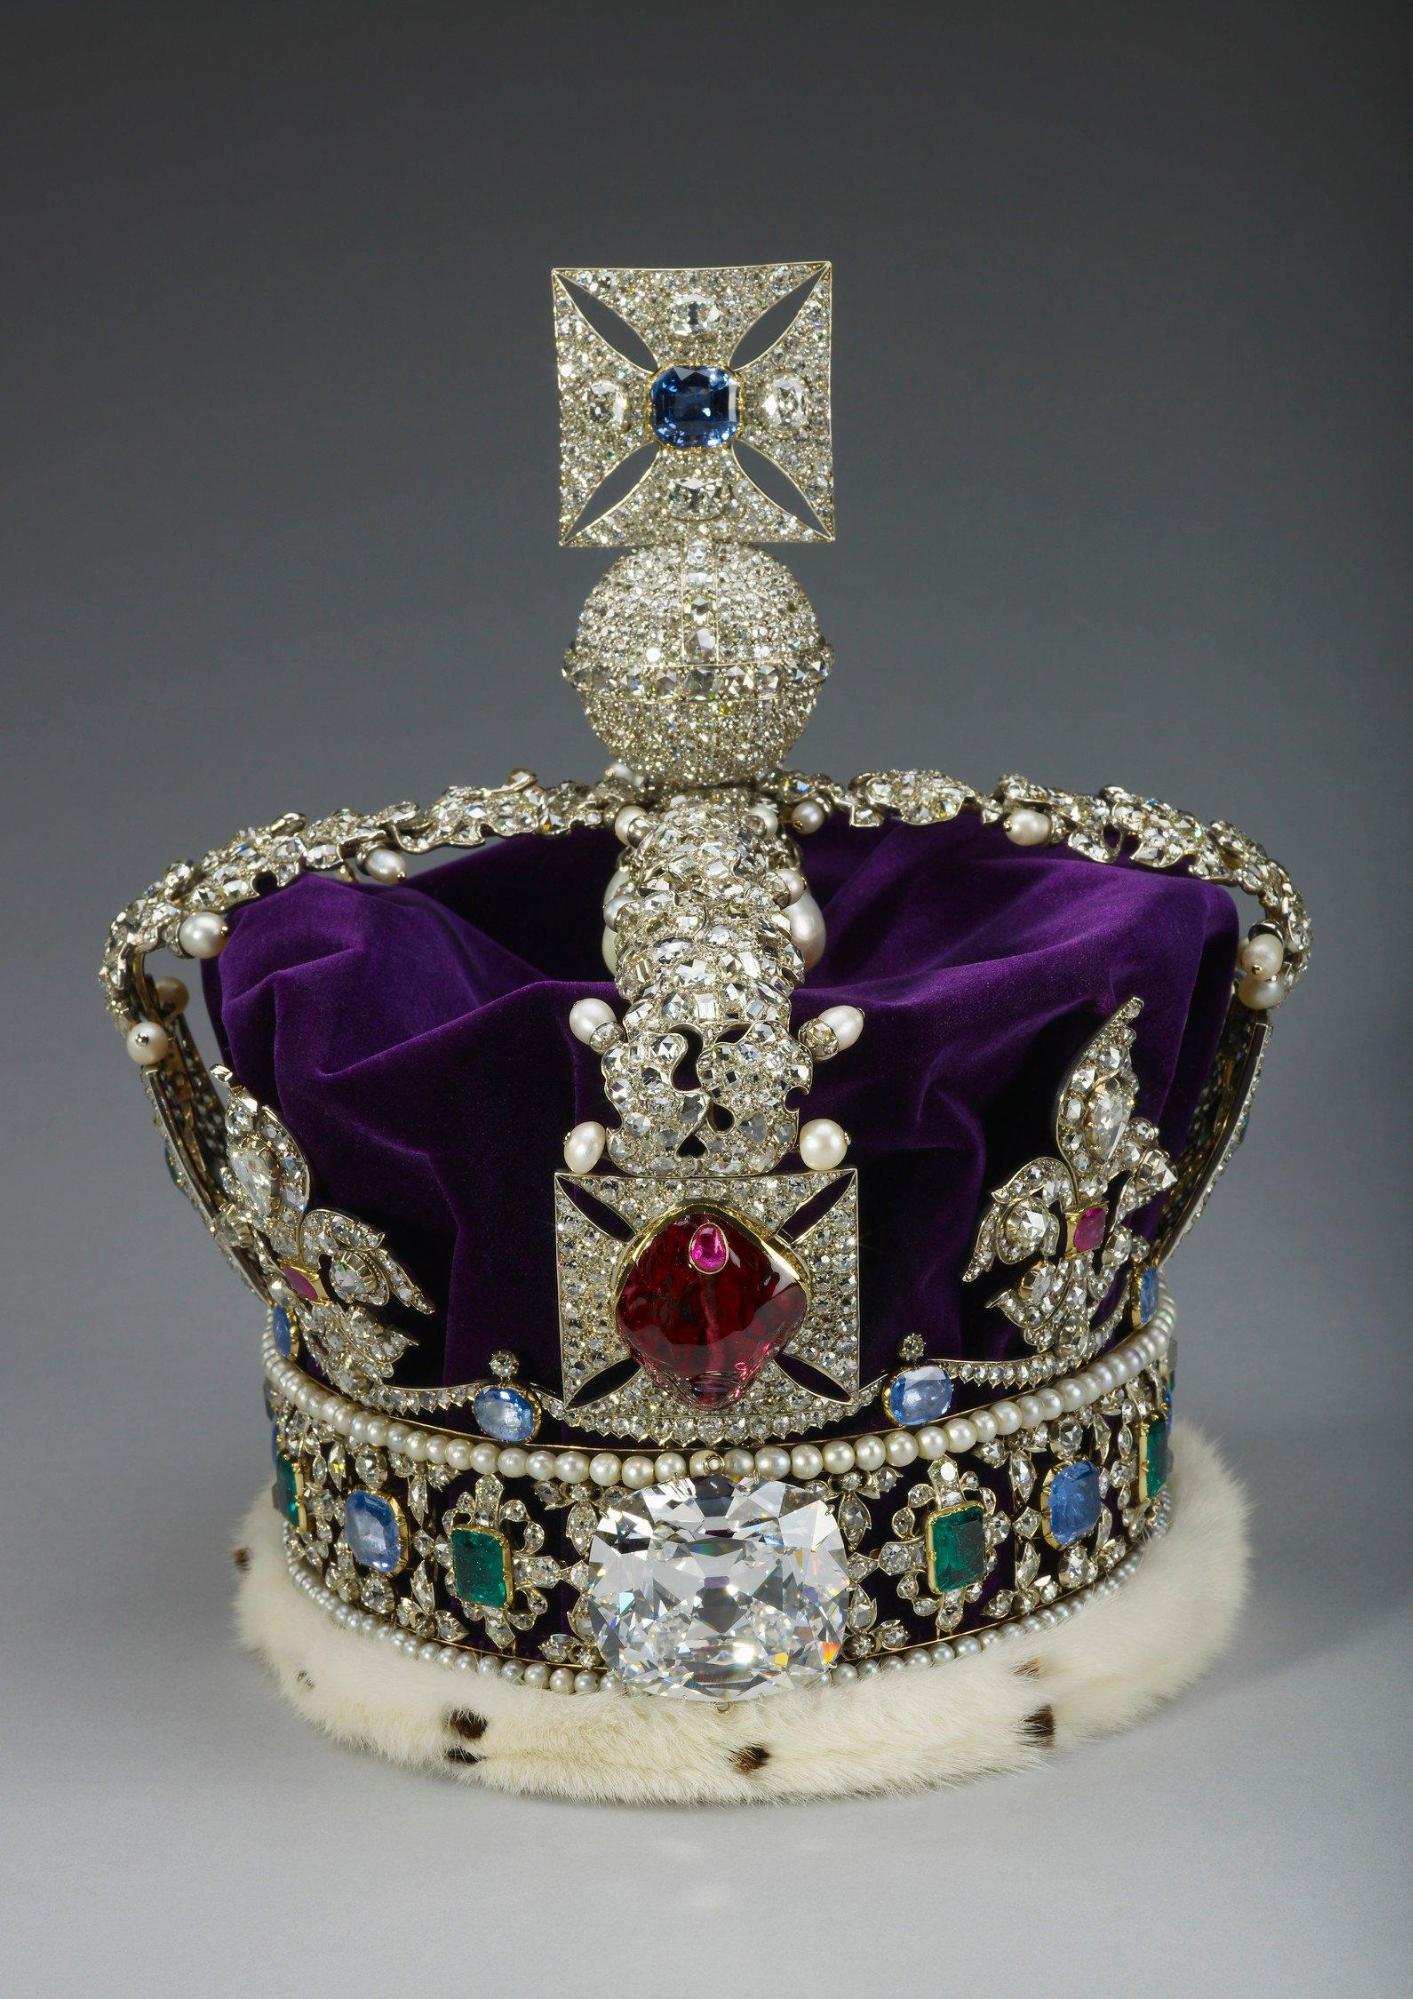 A picture containing crown jewels, indoor, accessory, decoratedDescription automatically generated